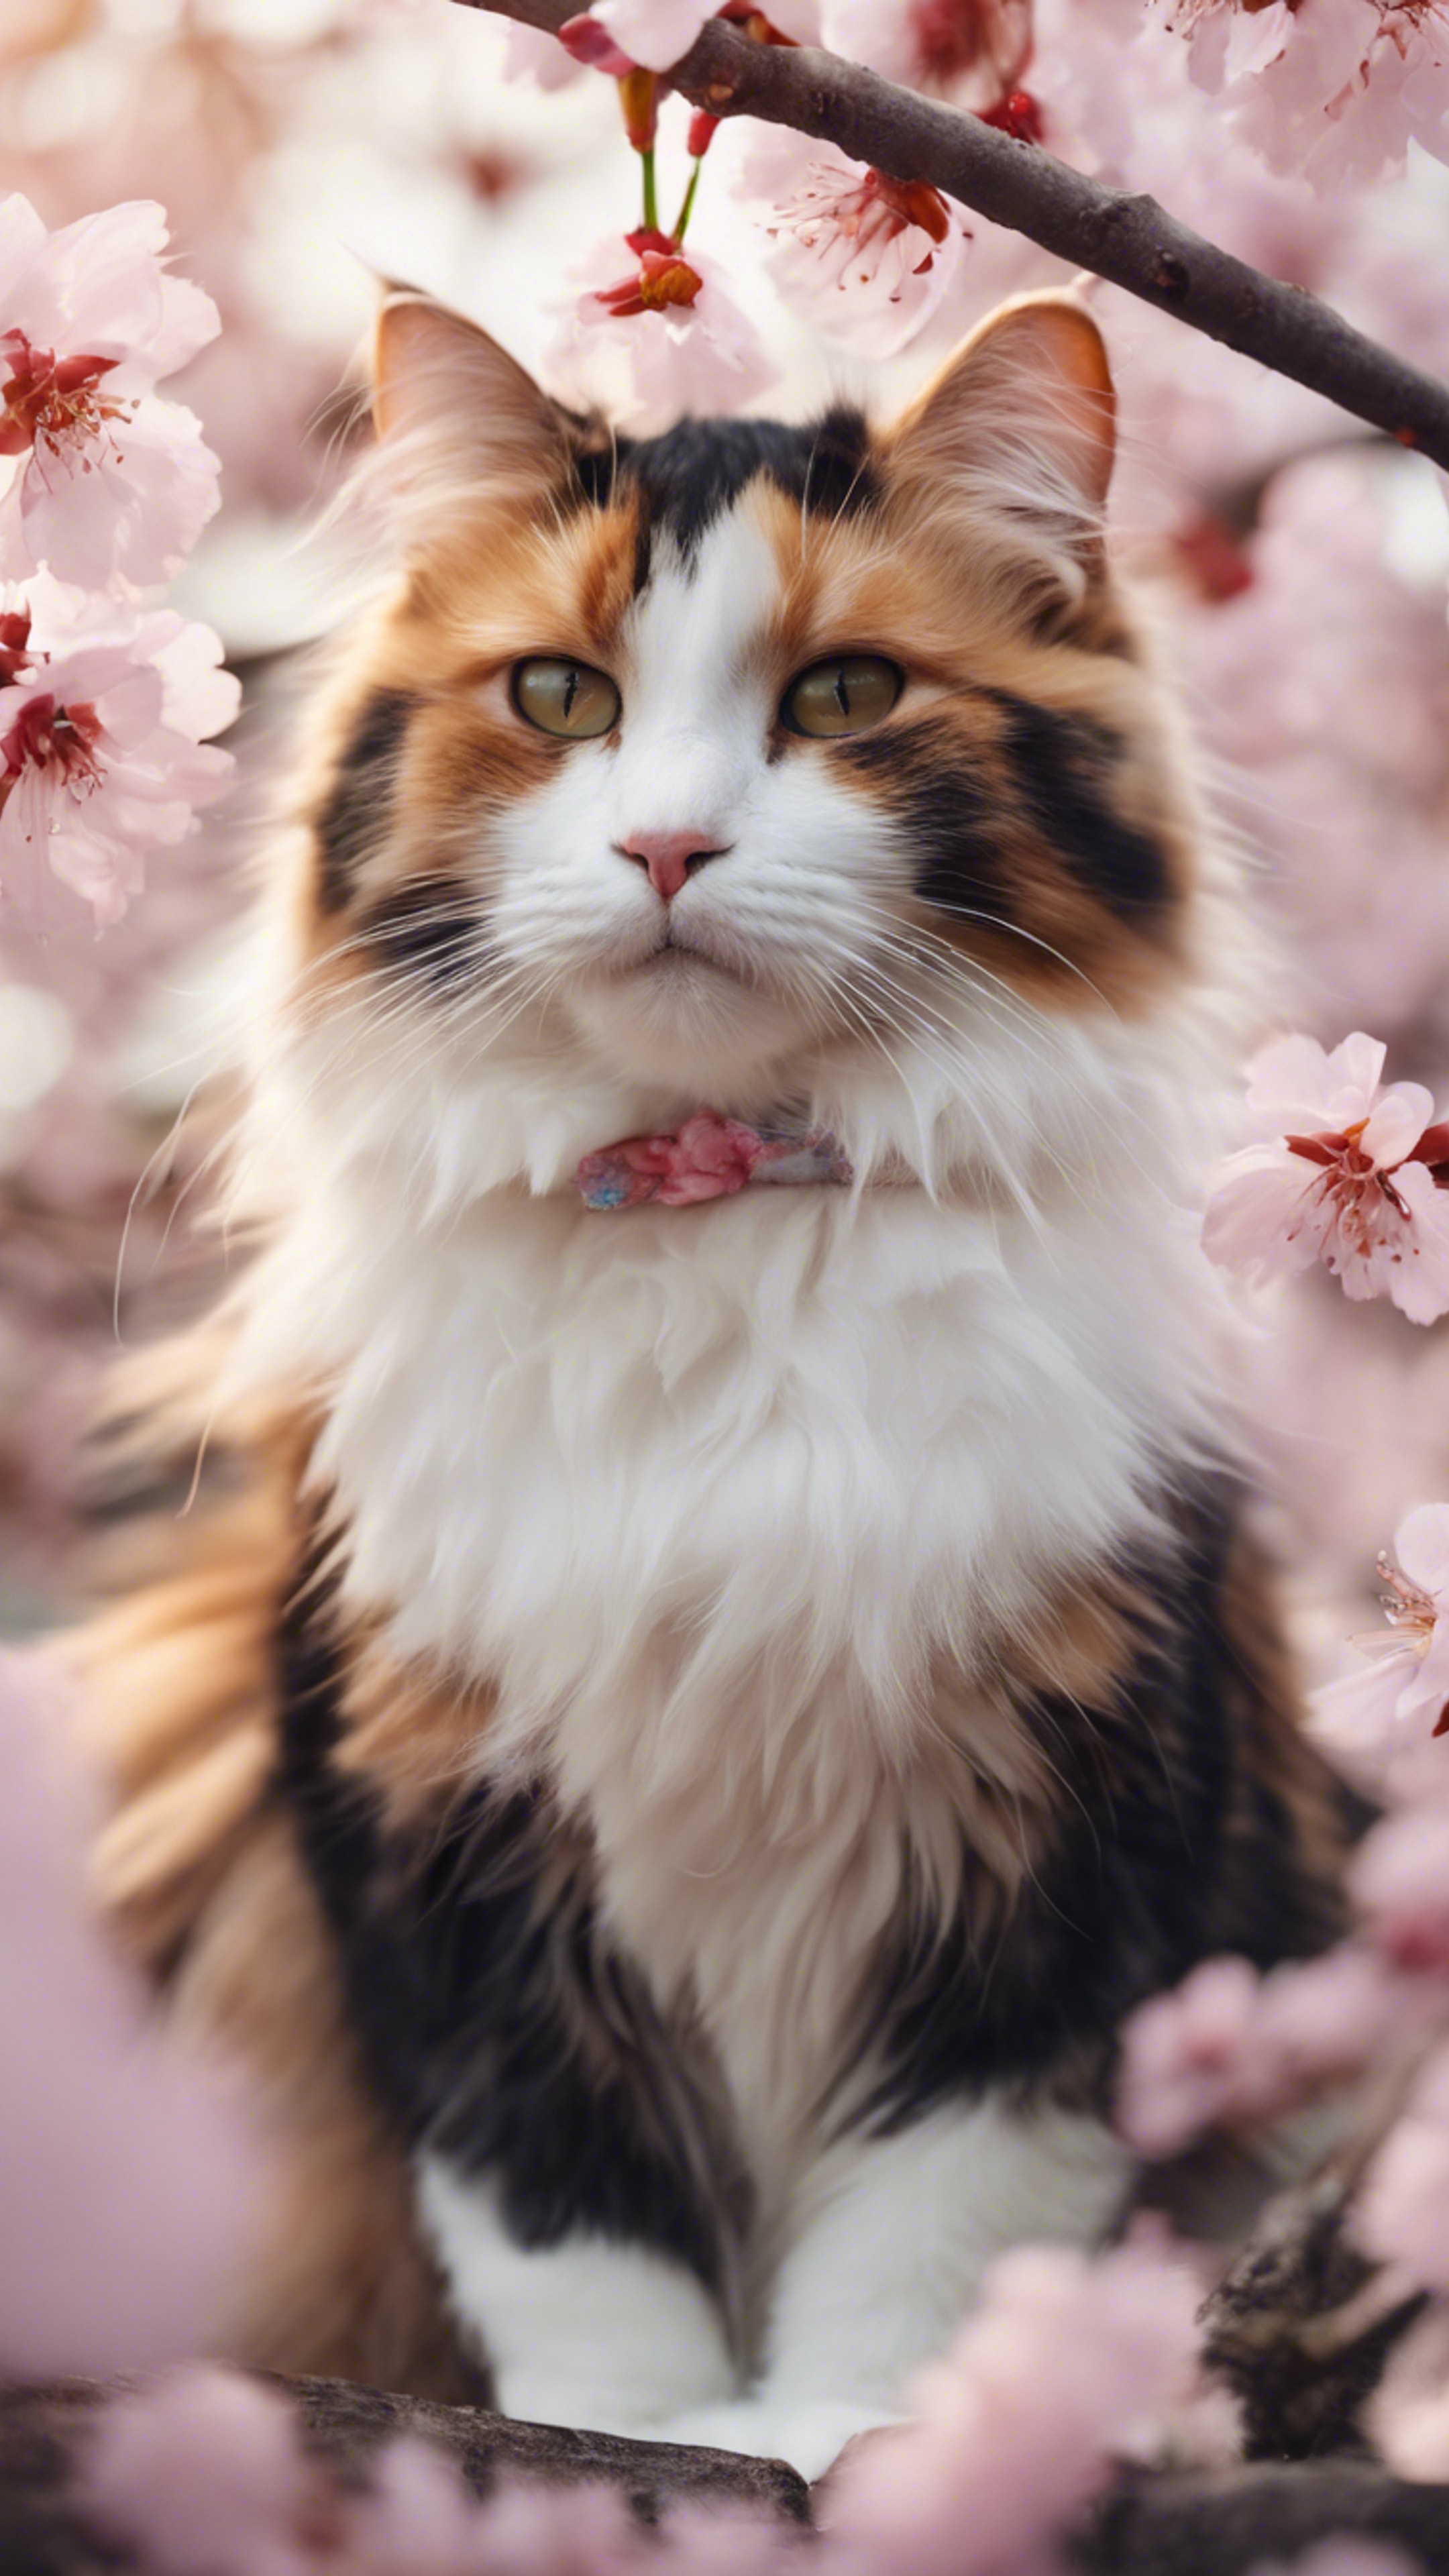 A fluffy calico cat in a cute pose sitting amongst cherry blossoms. Tapet[3cf3847c7c9c4f38aba7]